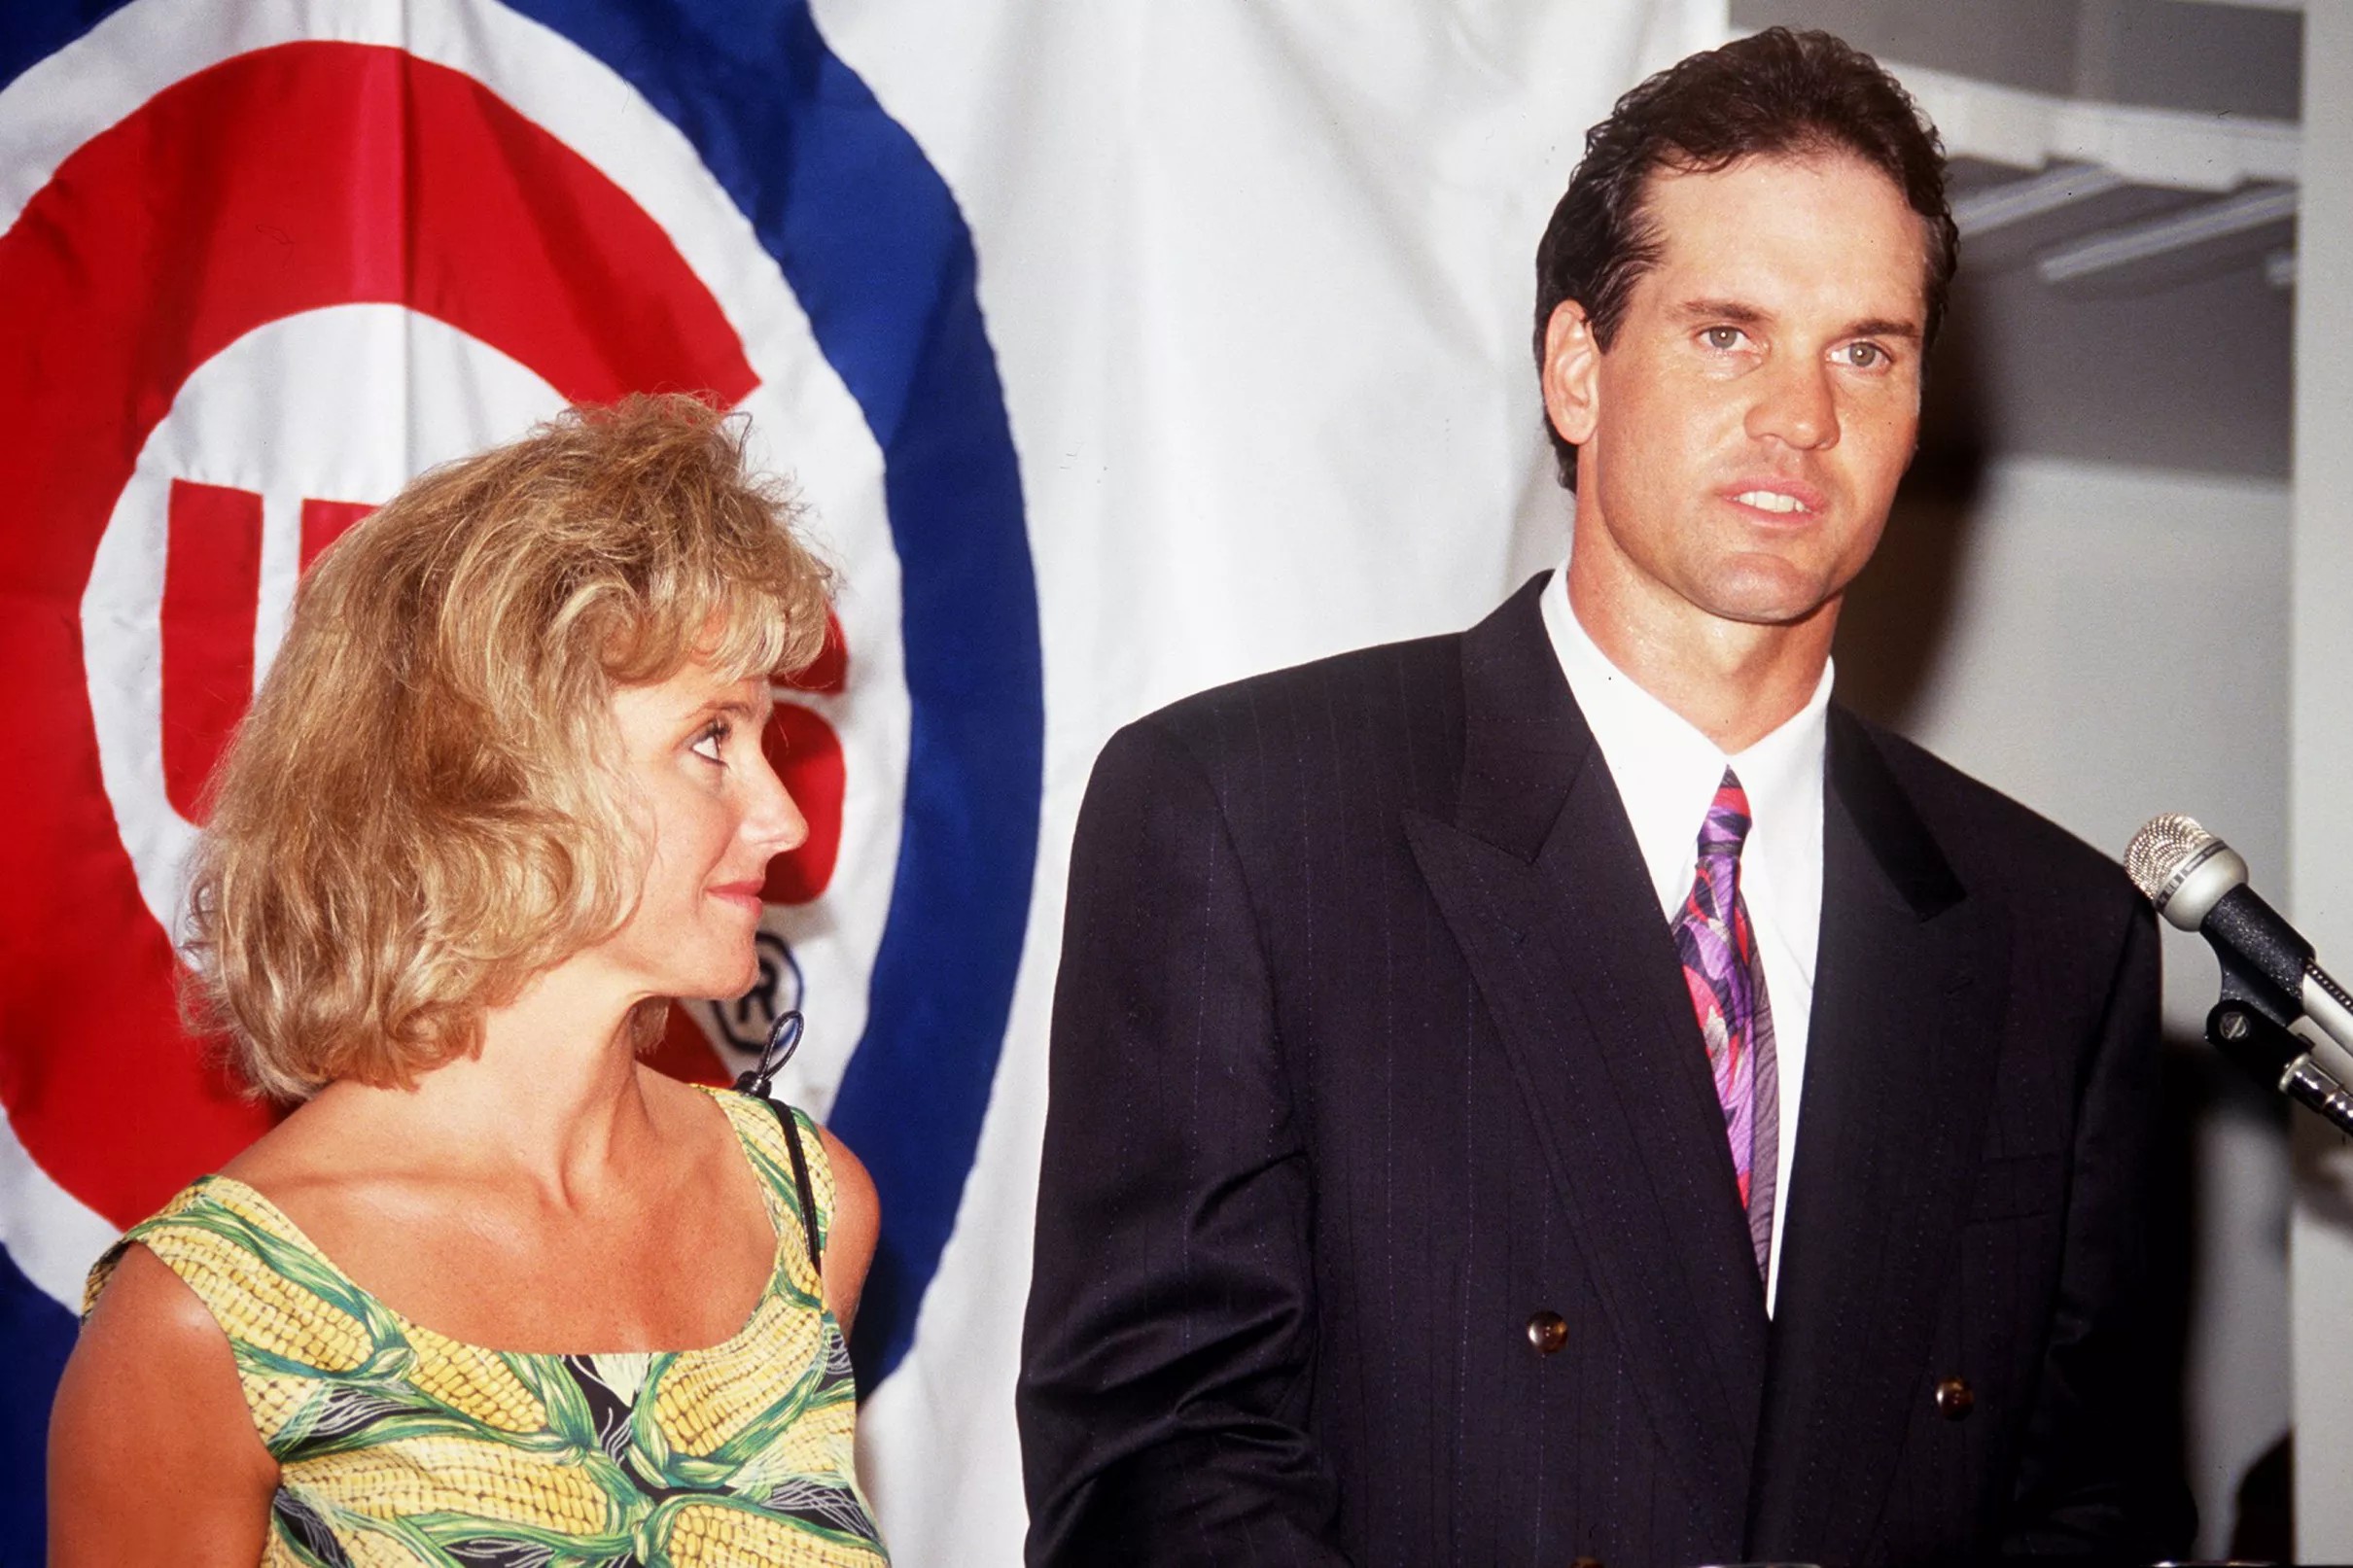 Today in Cubs history: Ryne Sandberg's first retirement